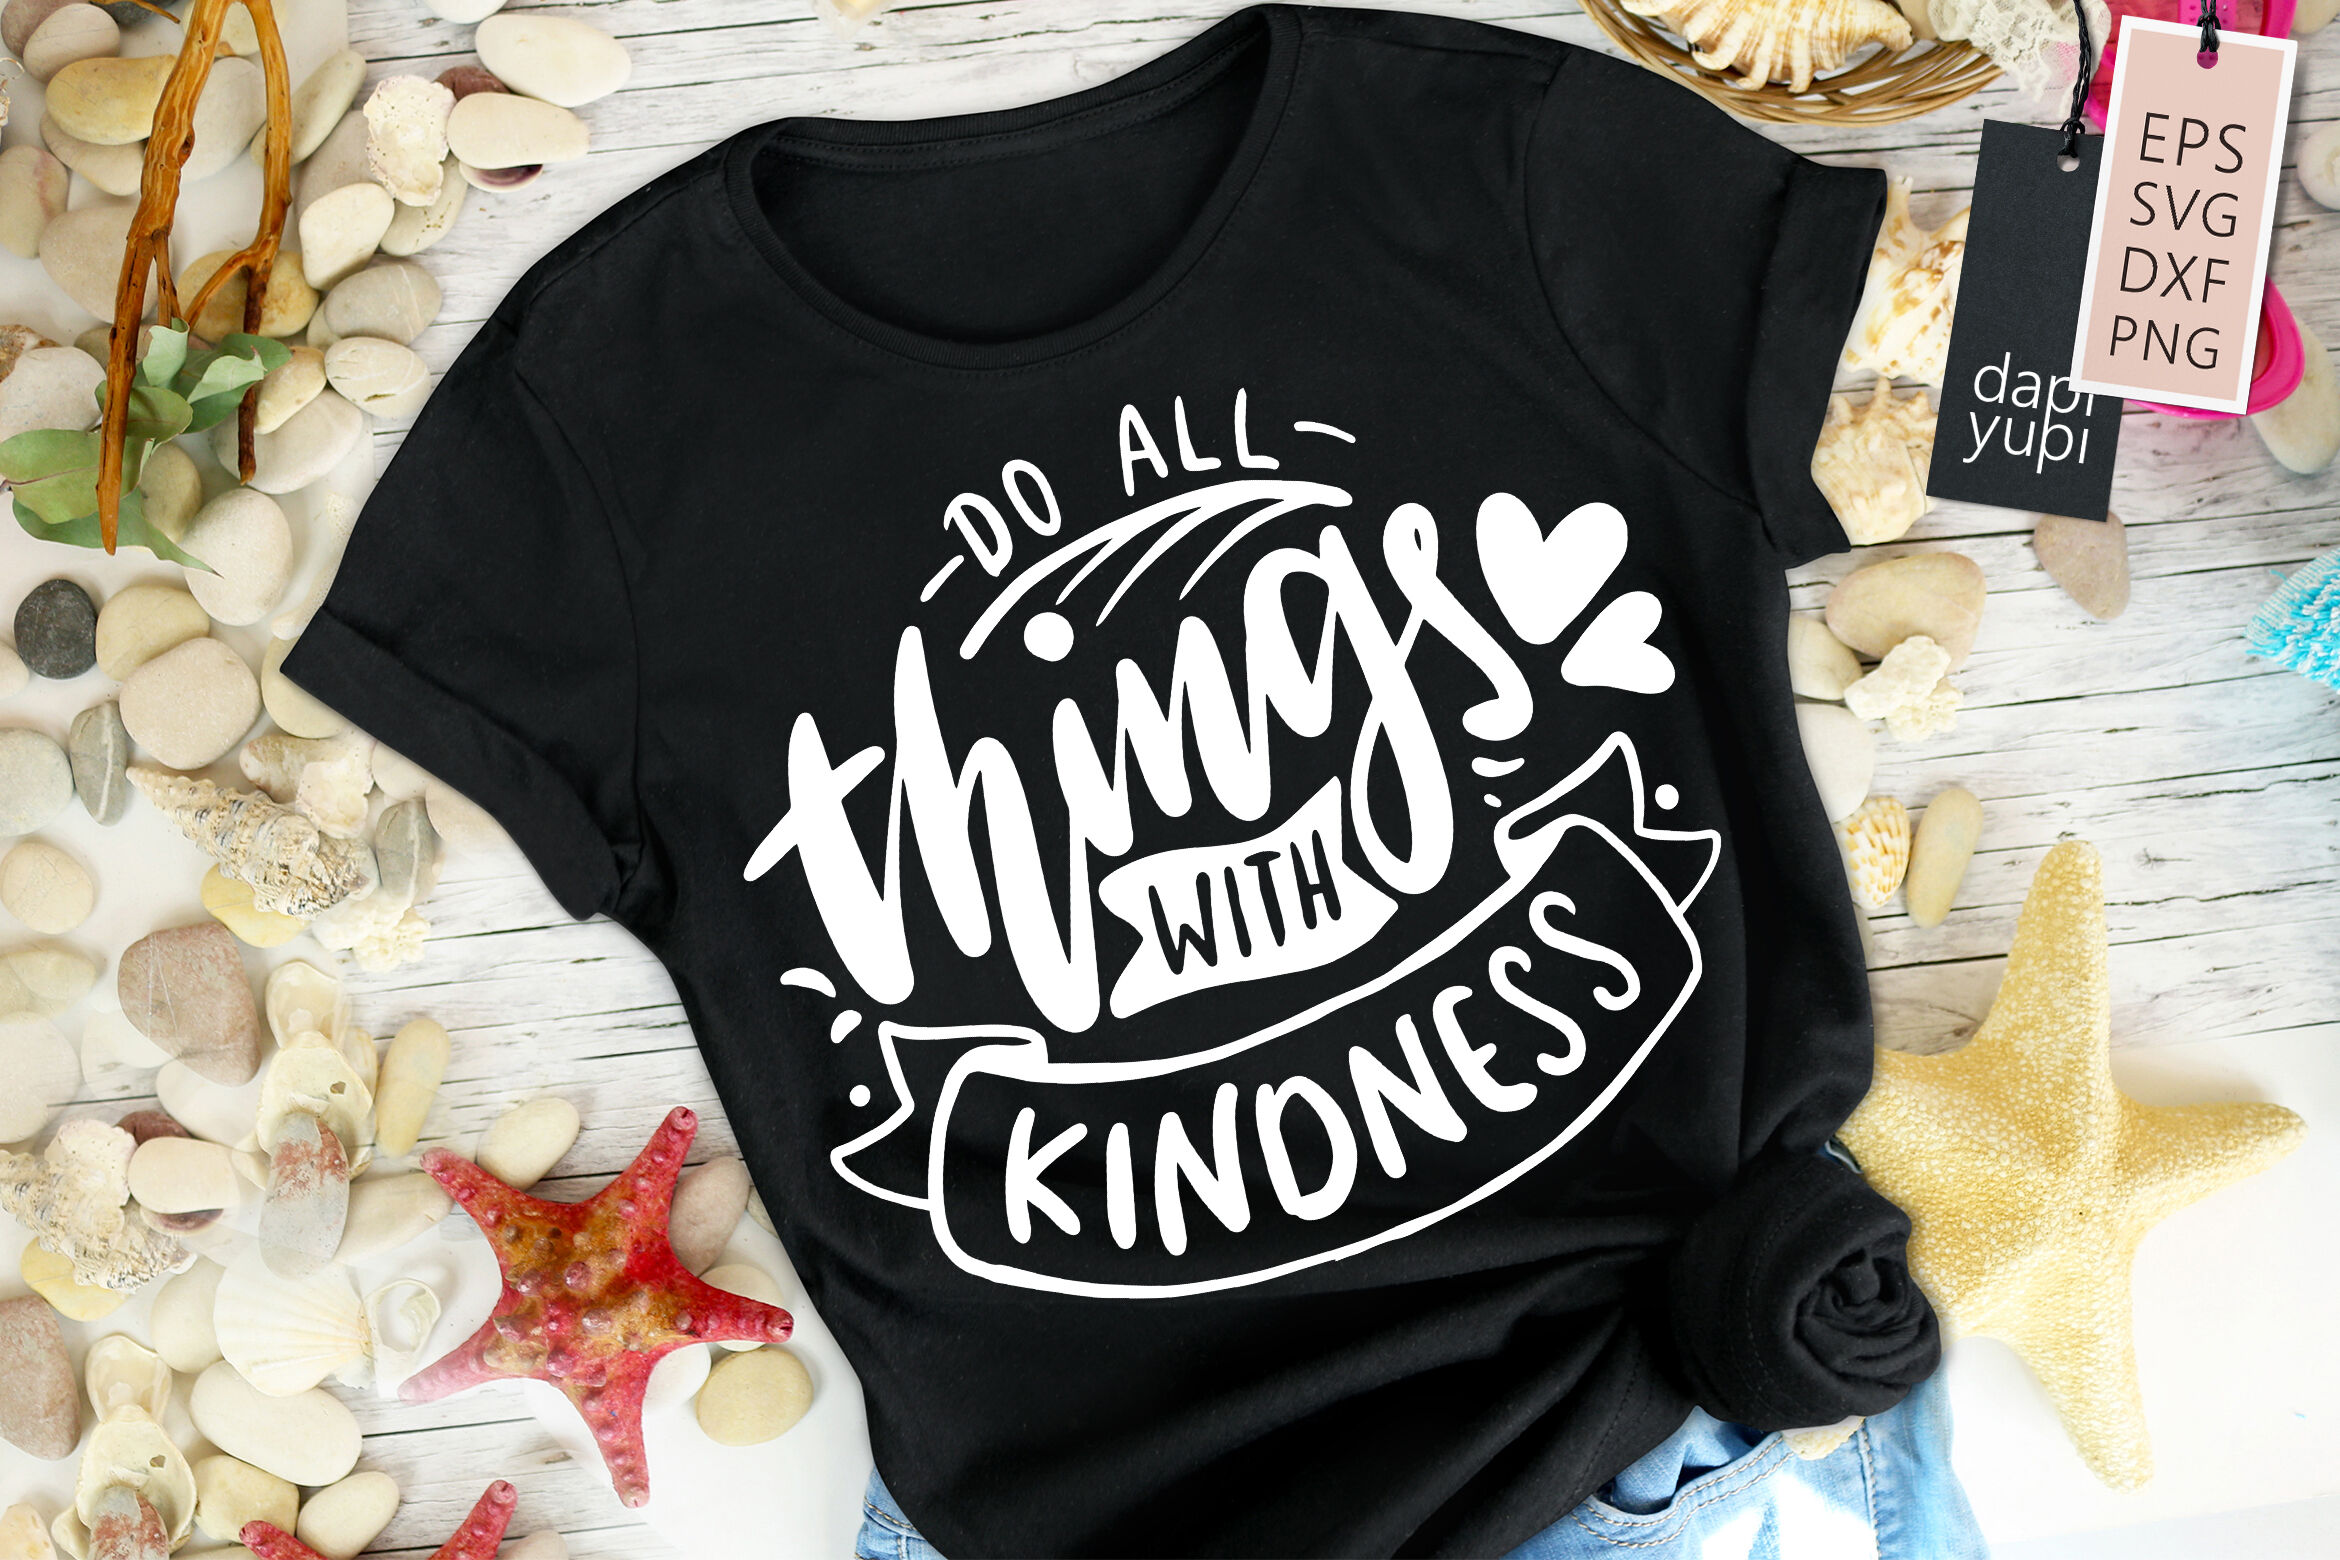 Do All Things With Kindness SVG Kindness Quotes By dapiyupi | TheHungryJPEG